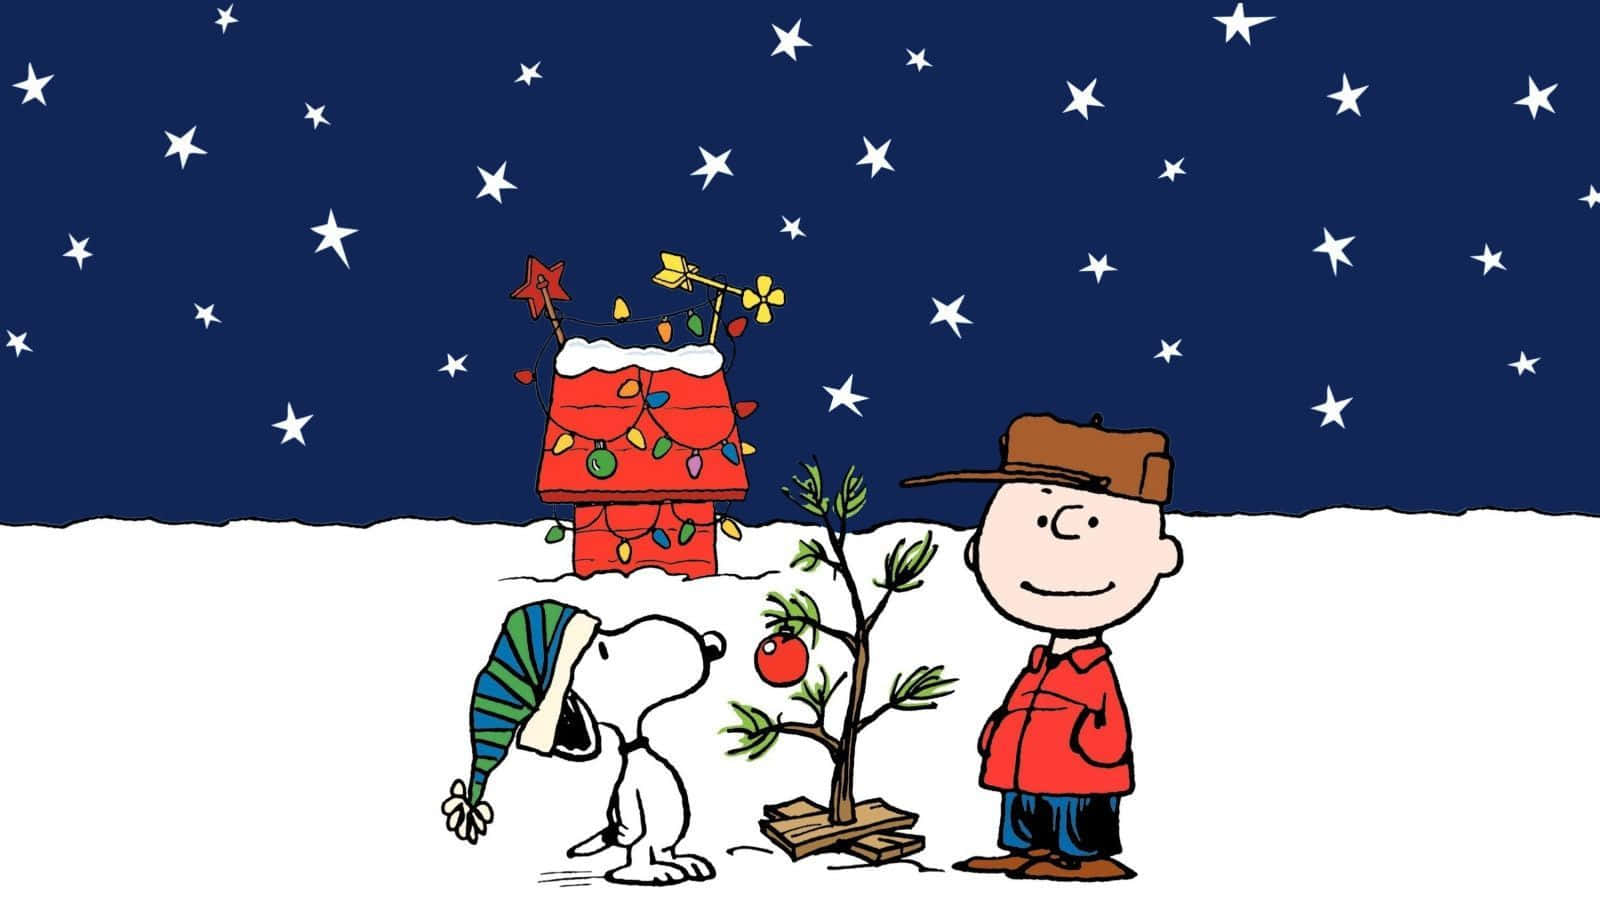 Spread Holiday Cheer with Charlie Brown Wallpaper